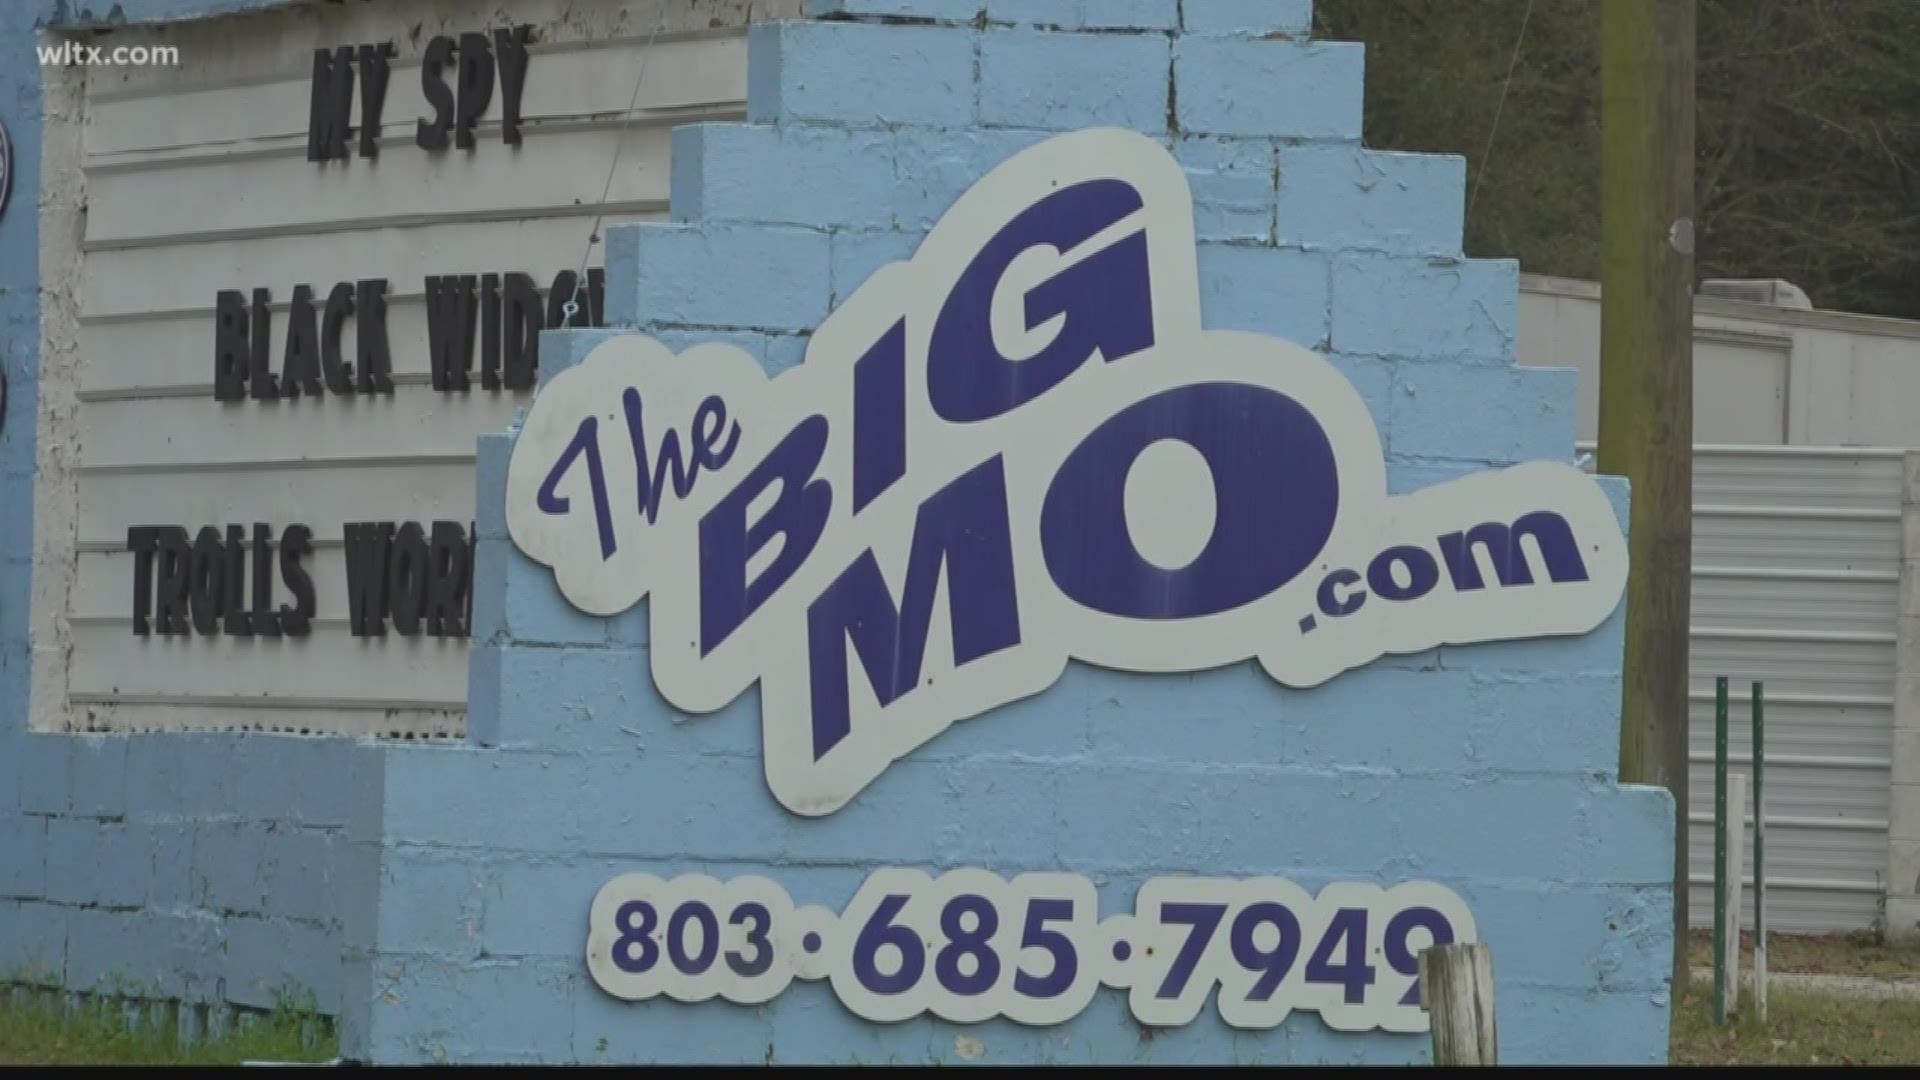 The Big Mo drive-in theater to stay open, taking precautions due to